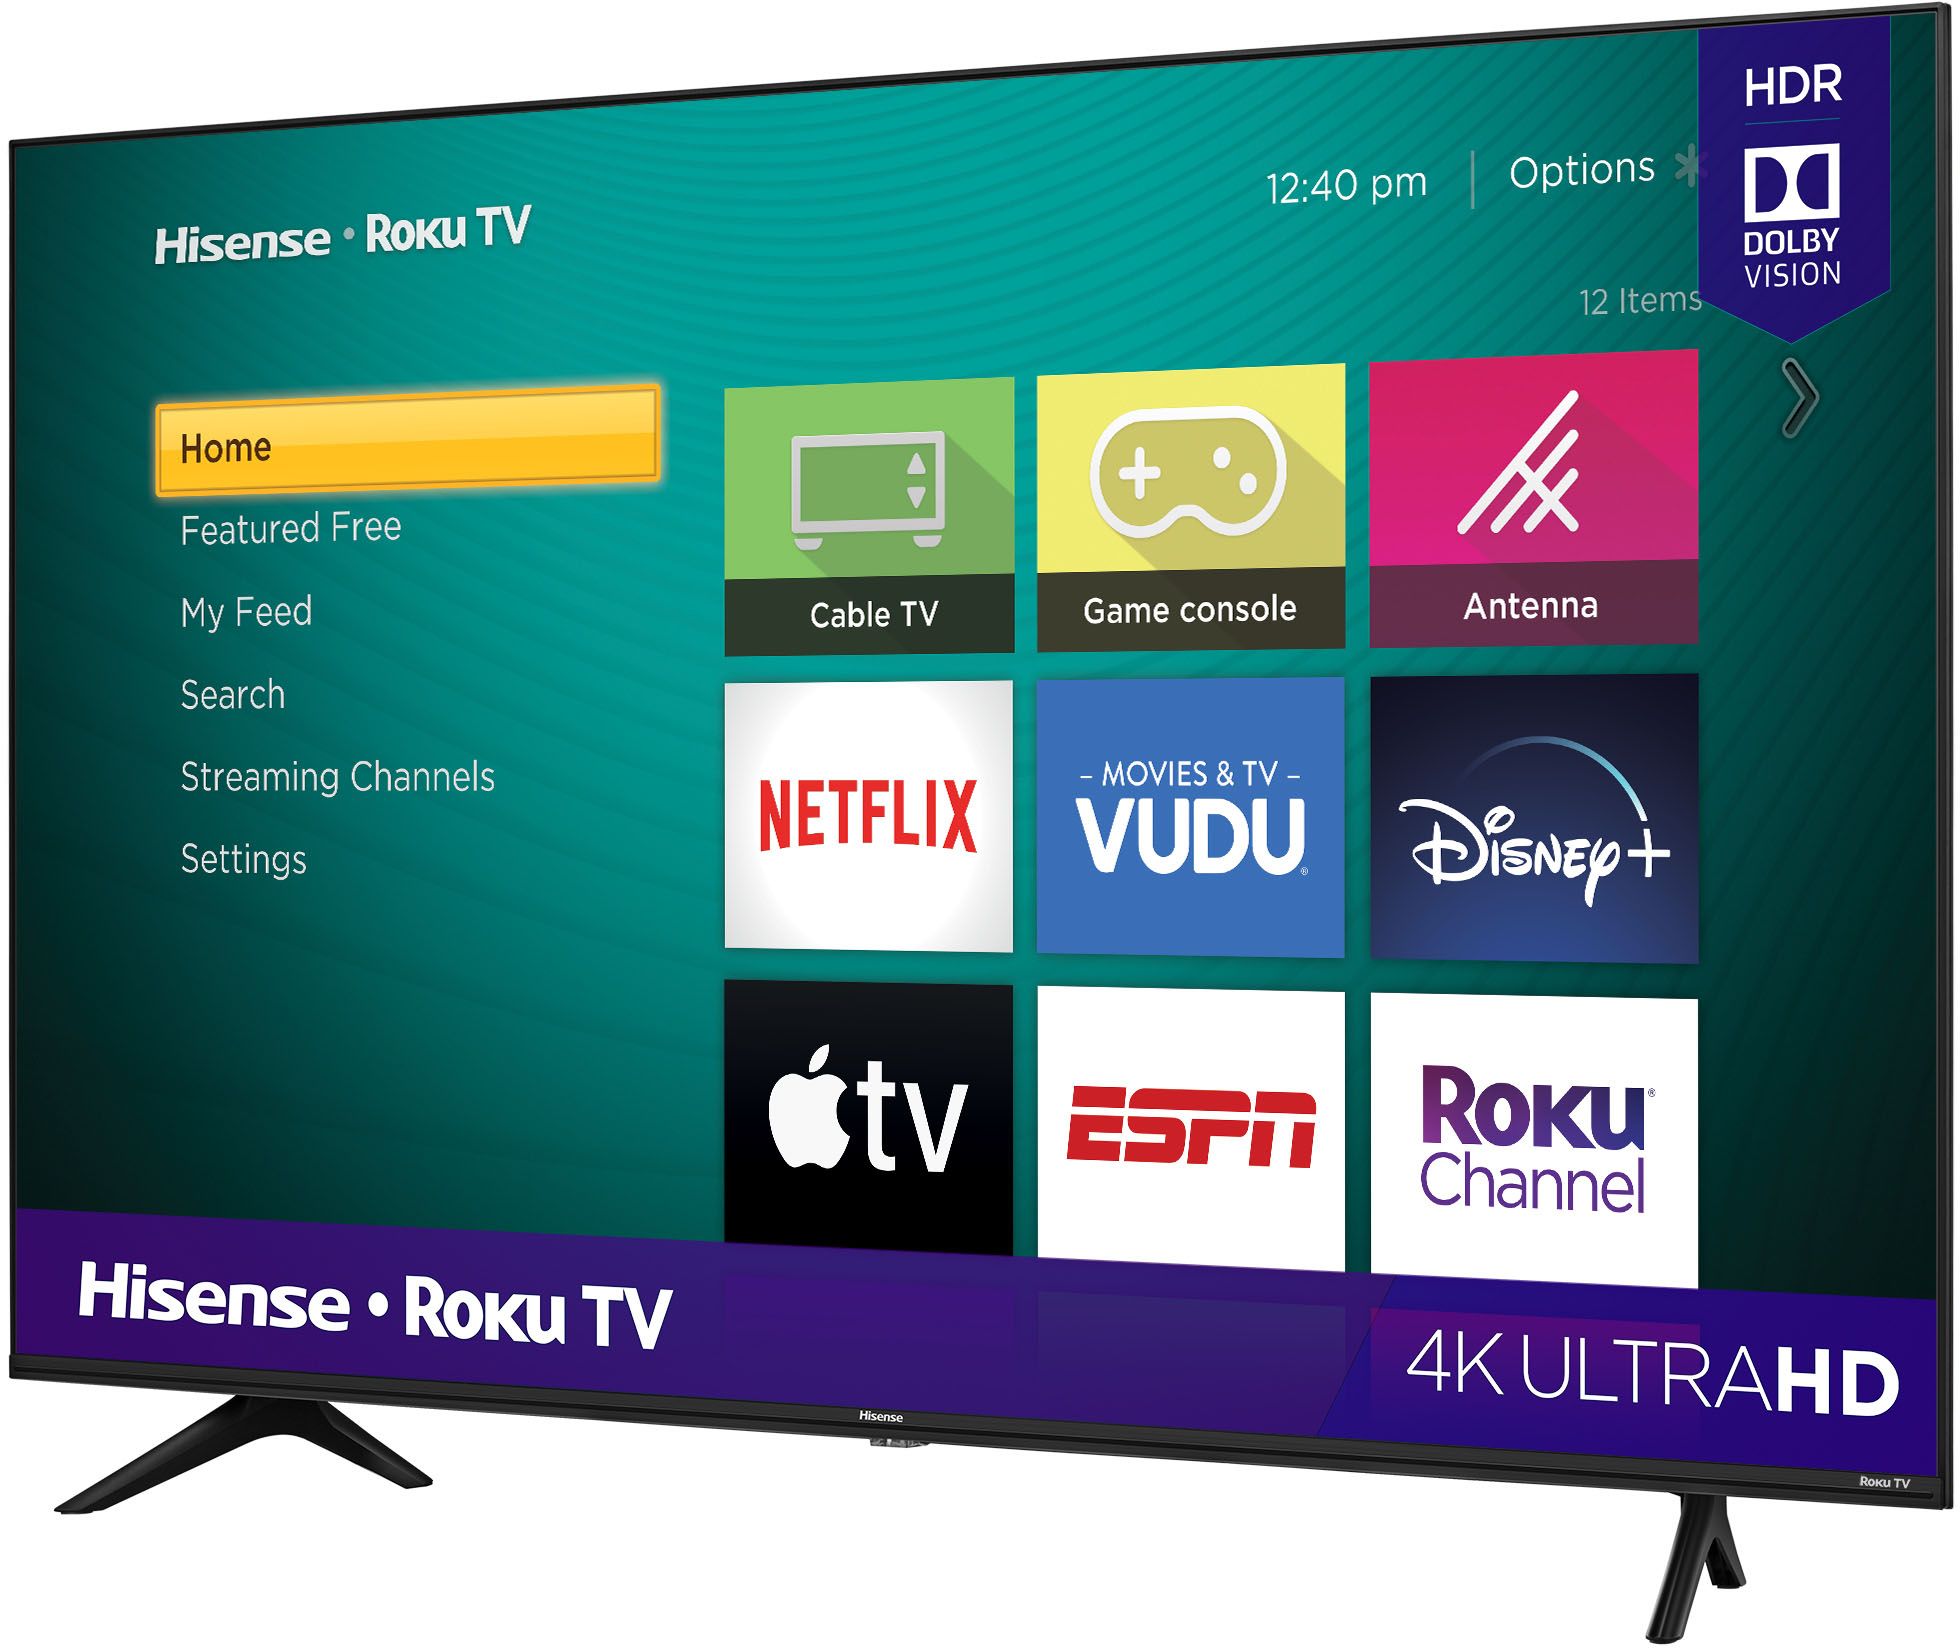 Where Is The Power Button On A Hisense Roku Tv